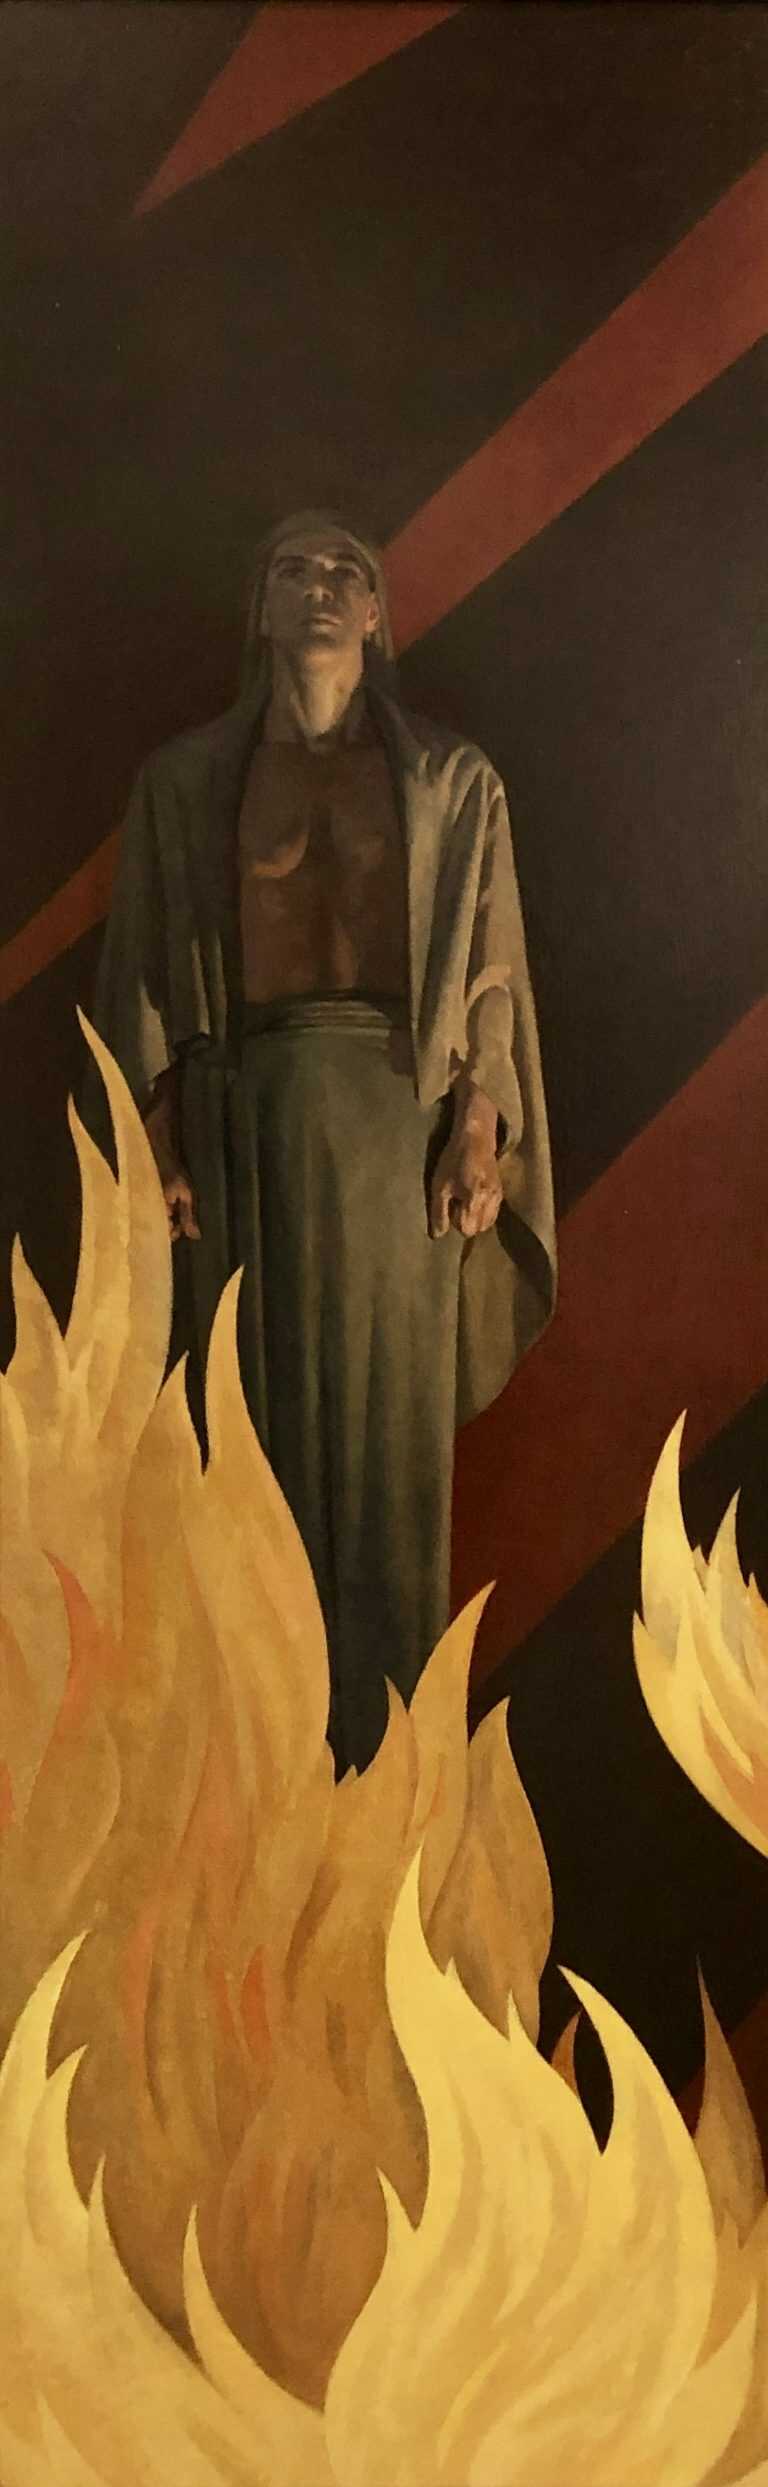 Painting by R.H. Ives Gammell: Puppy Panel: Man in Flames, available at Childs Gallery, Boston